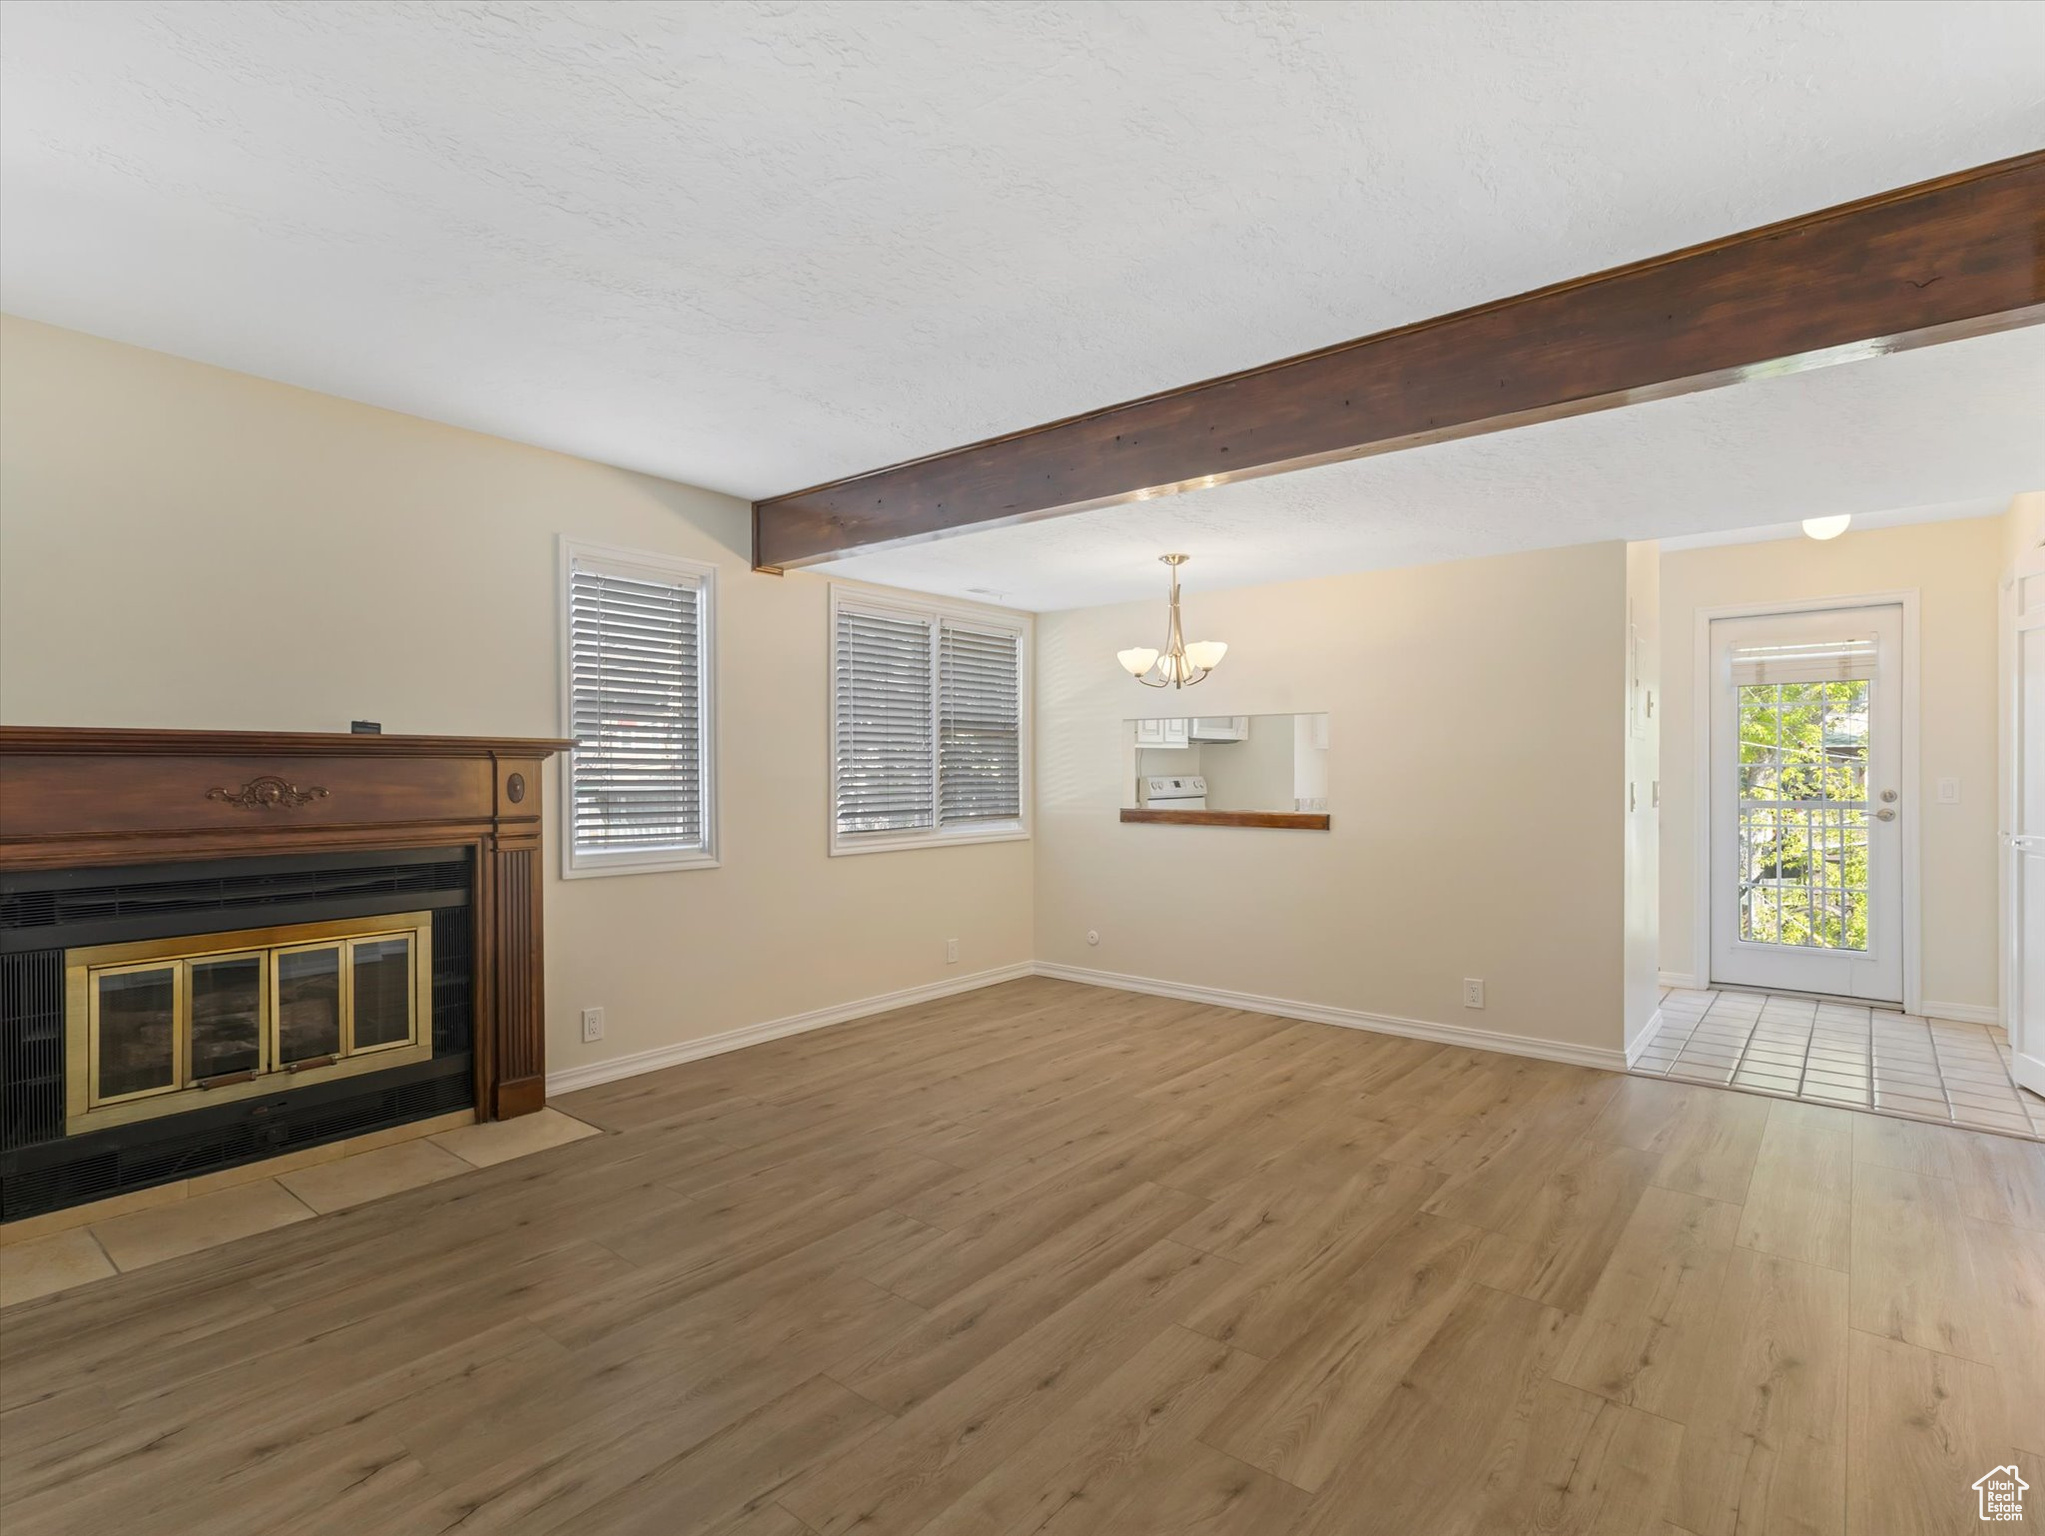 Unfurnished living room featuring hardwood / wood-style floors, beam ceiling, and a chandelier